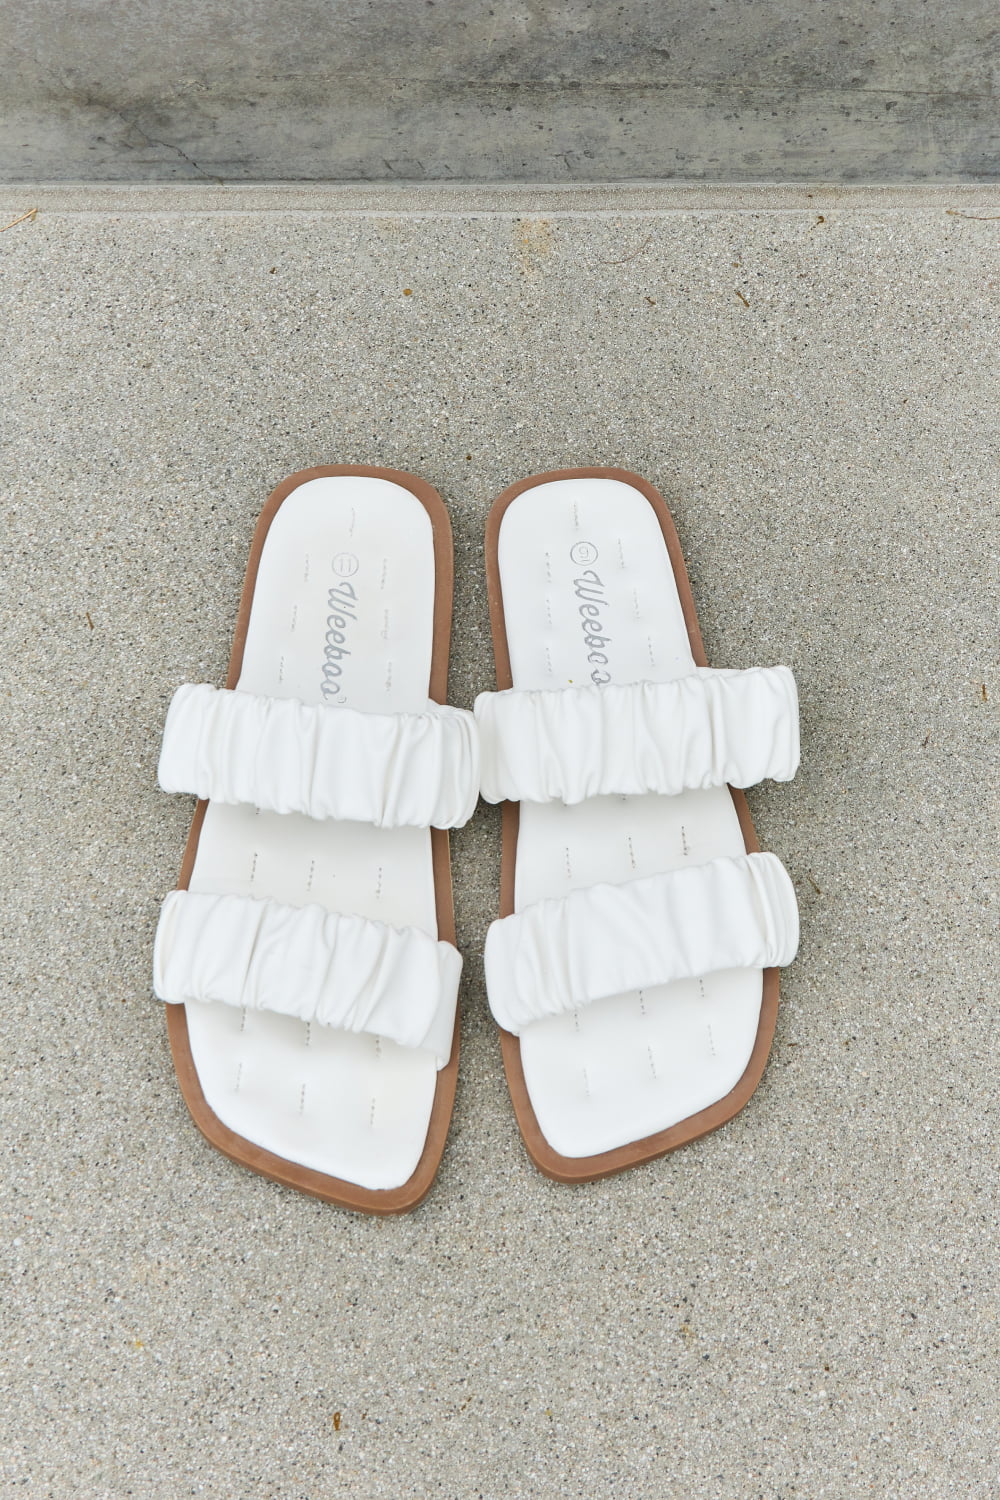 Weeboo Double Strap Scrunch Sandal in White - Guy Christopher 